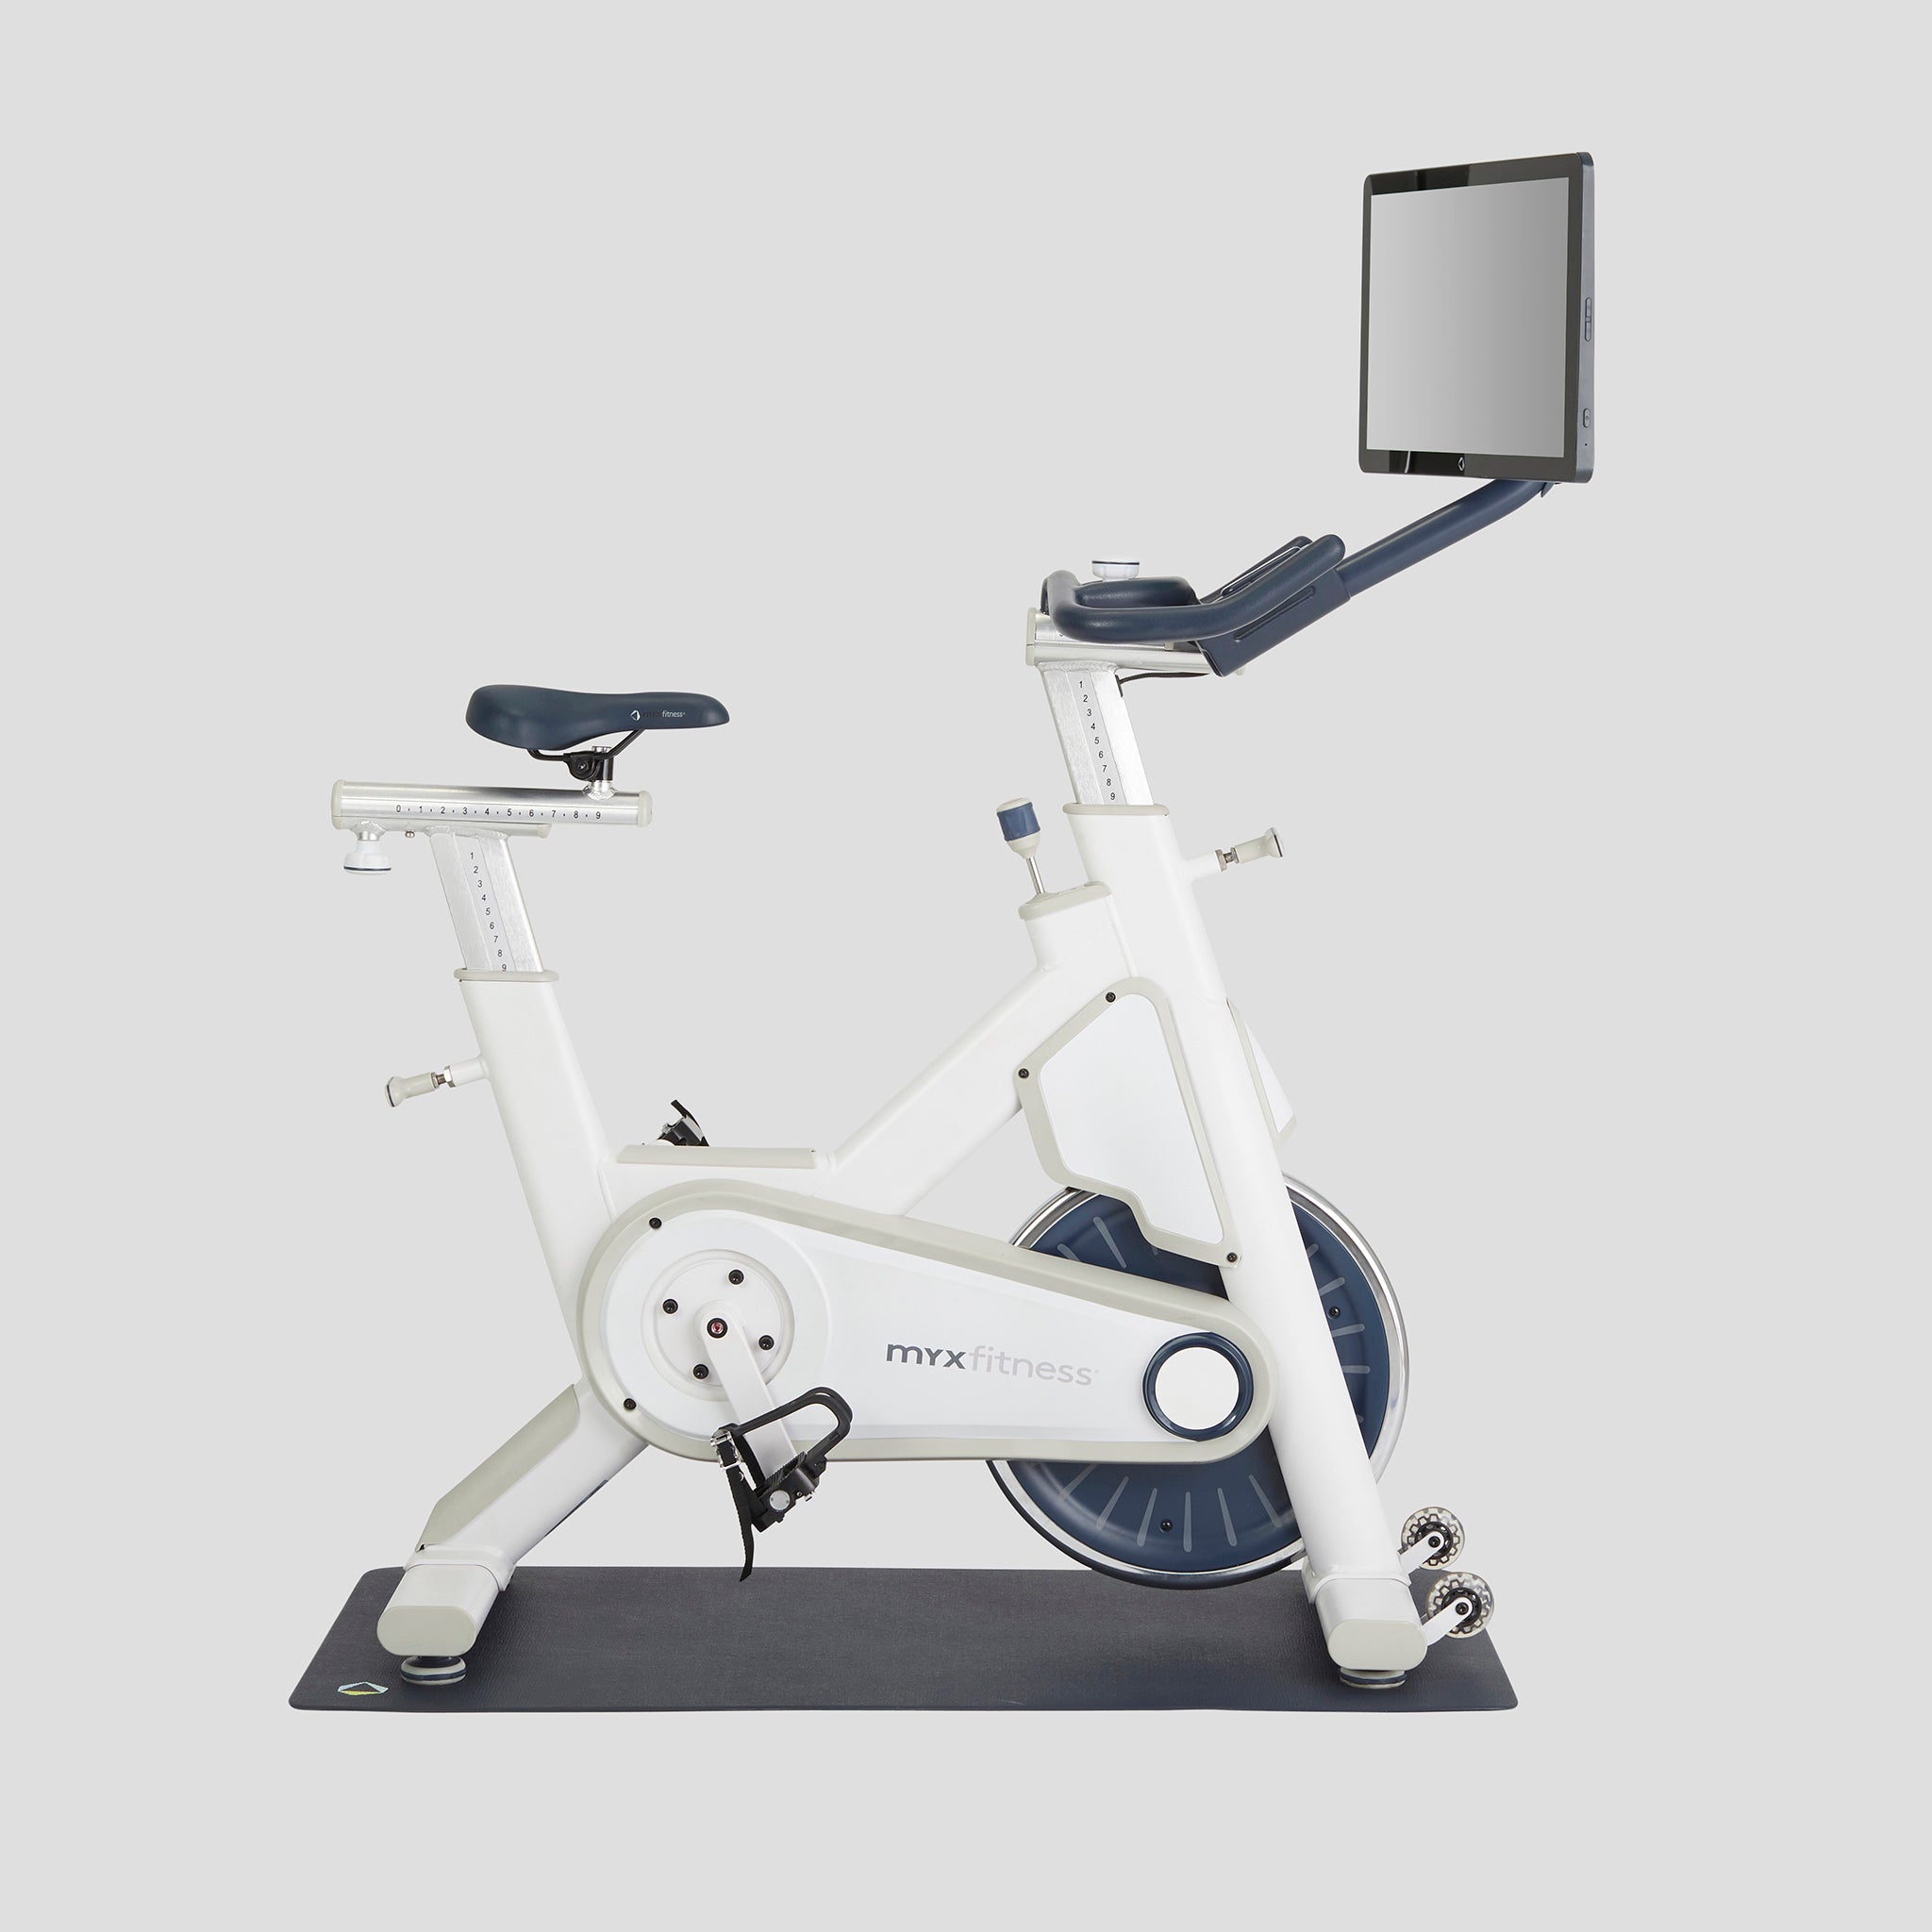 5 Day Where To Buy Myx Fitness Bike for Fat Body